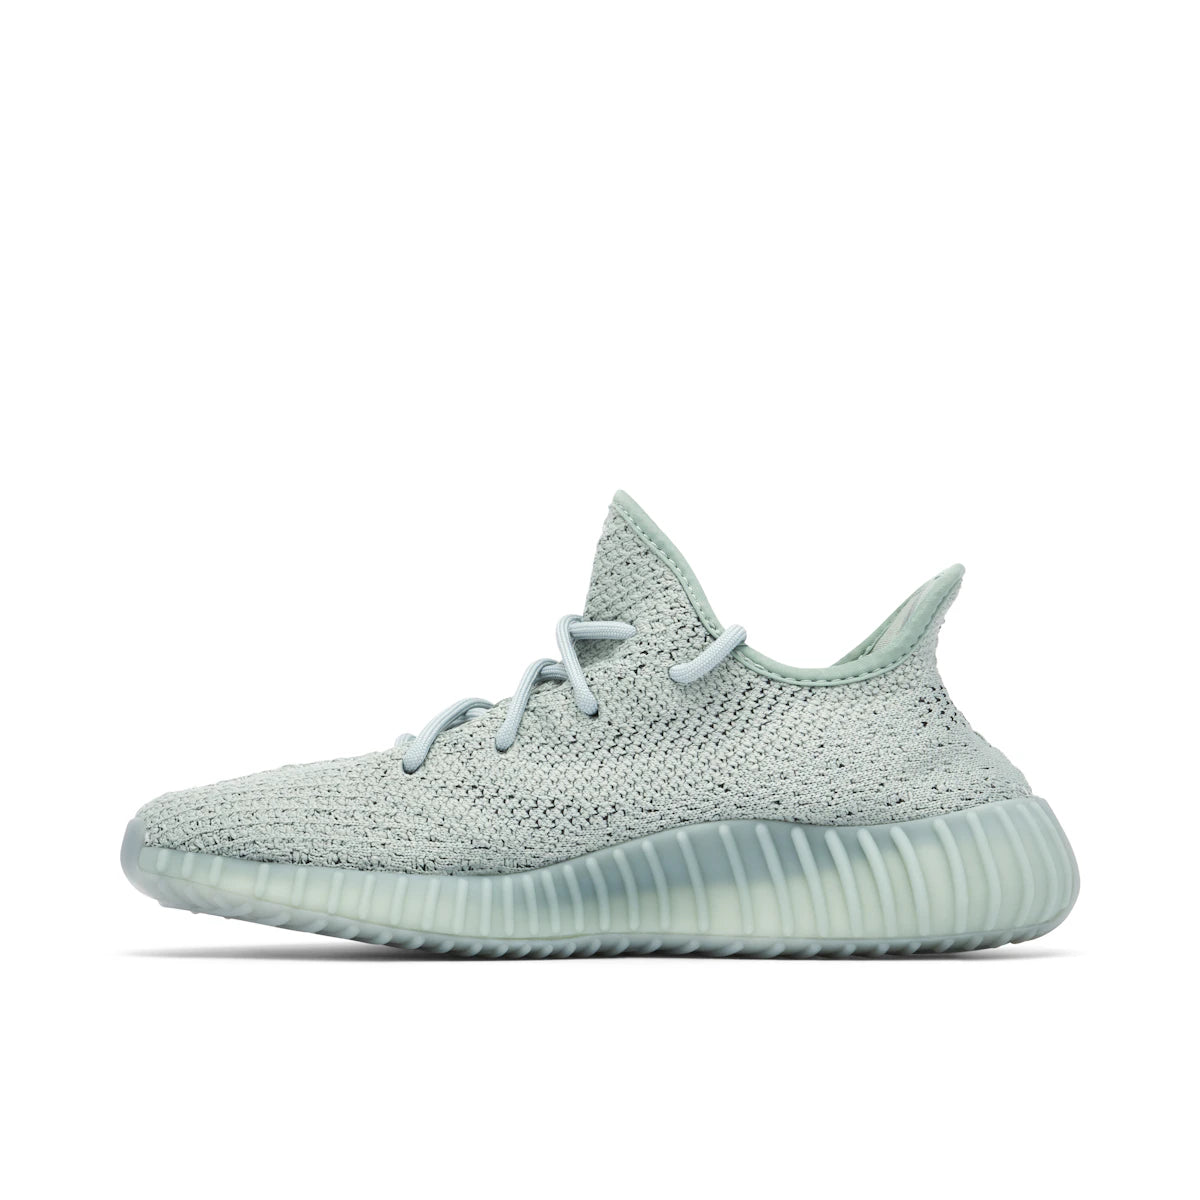 adidas Yeezy Boost 350 V2 Salt by Yeezy from £293.00